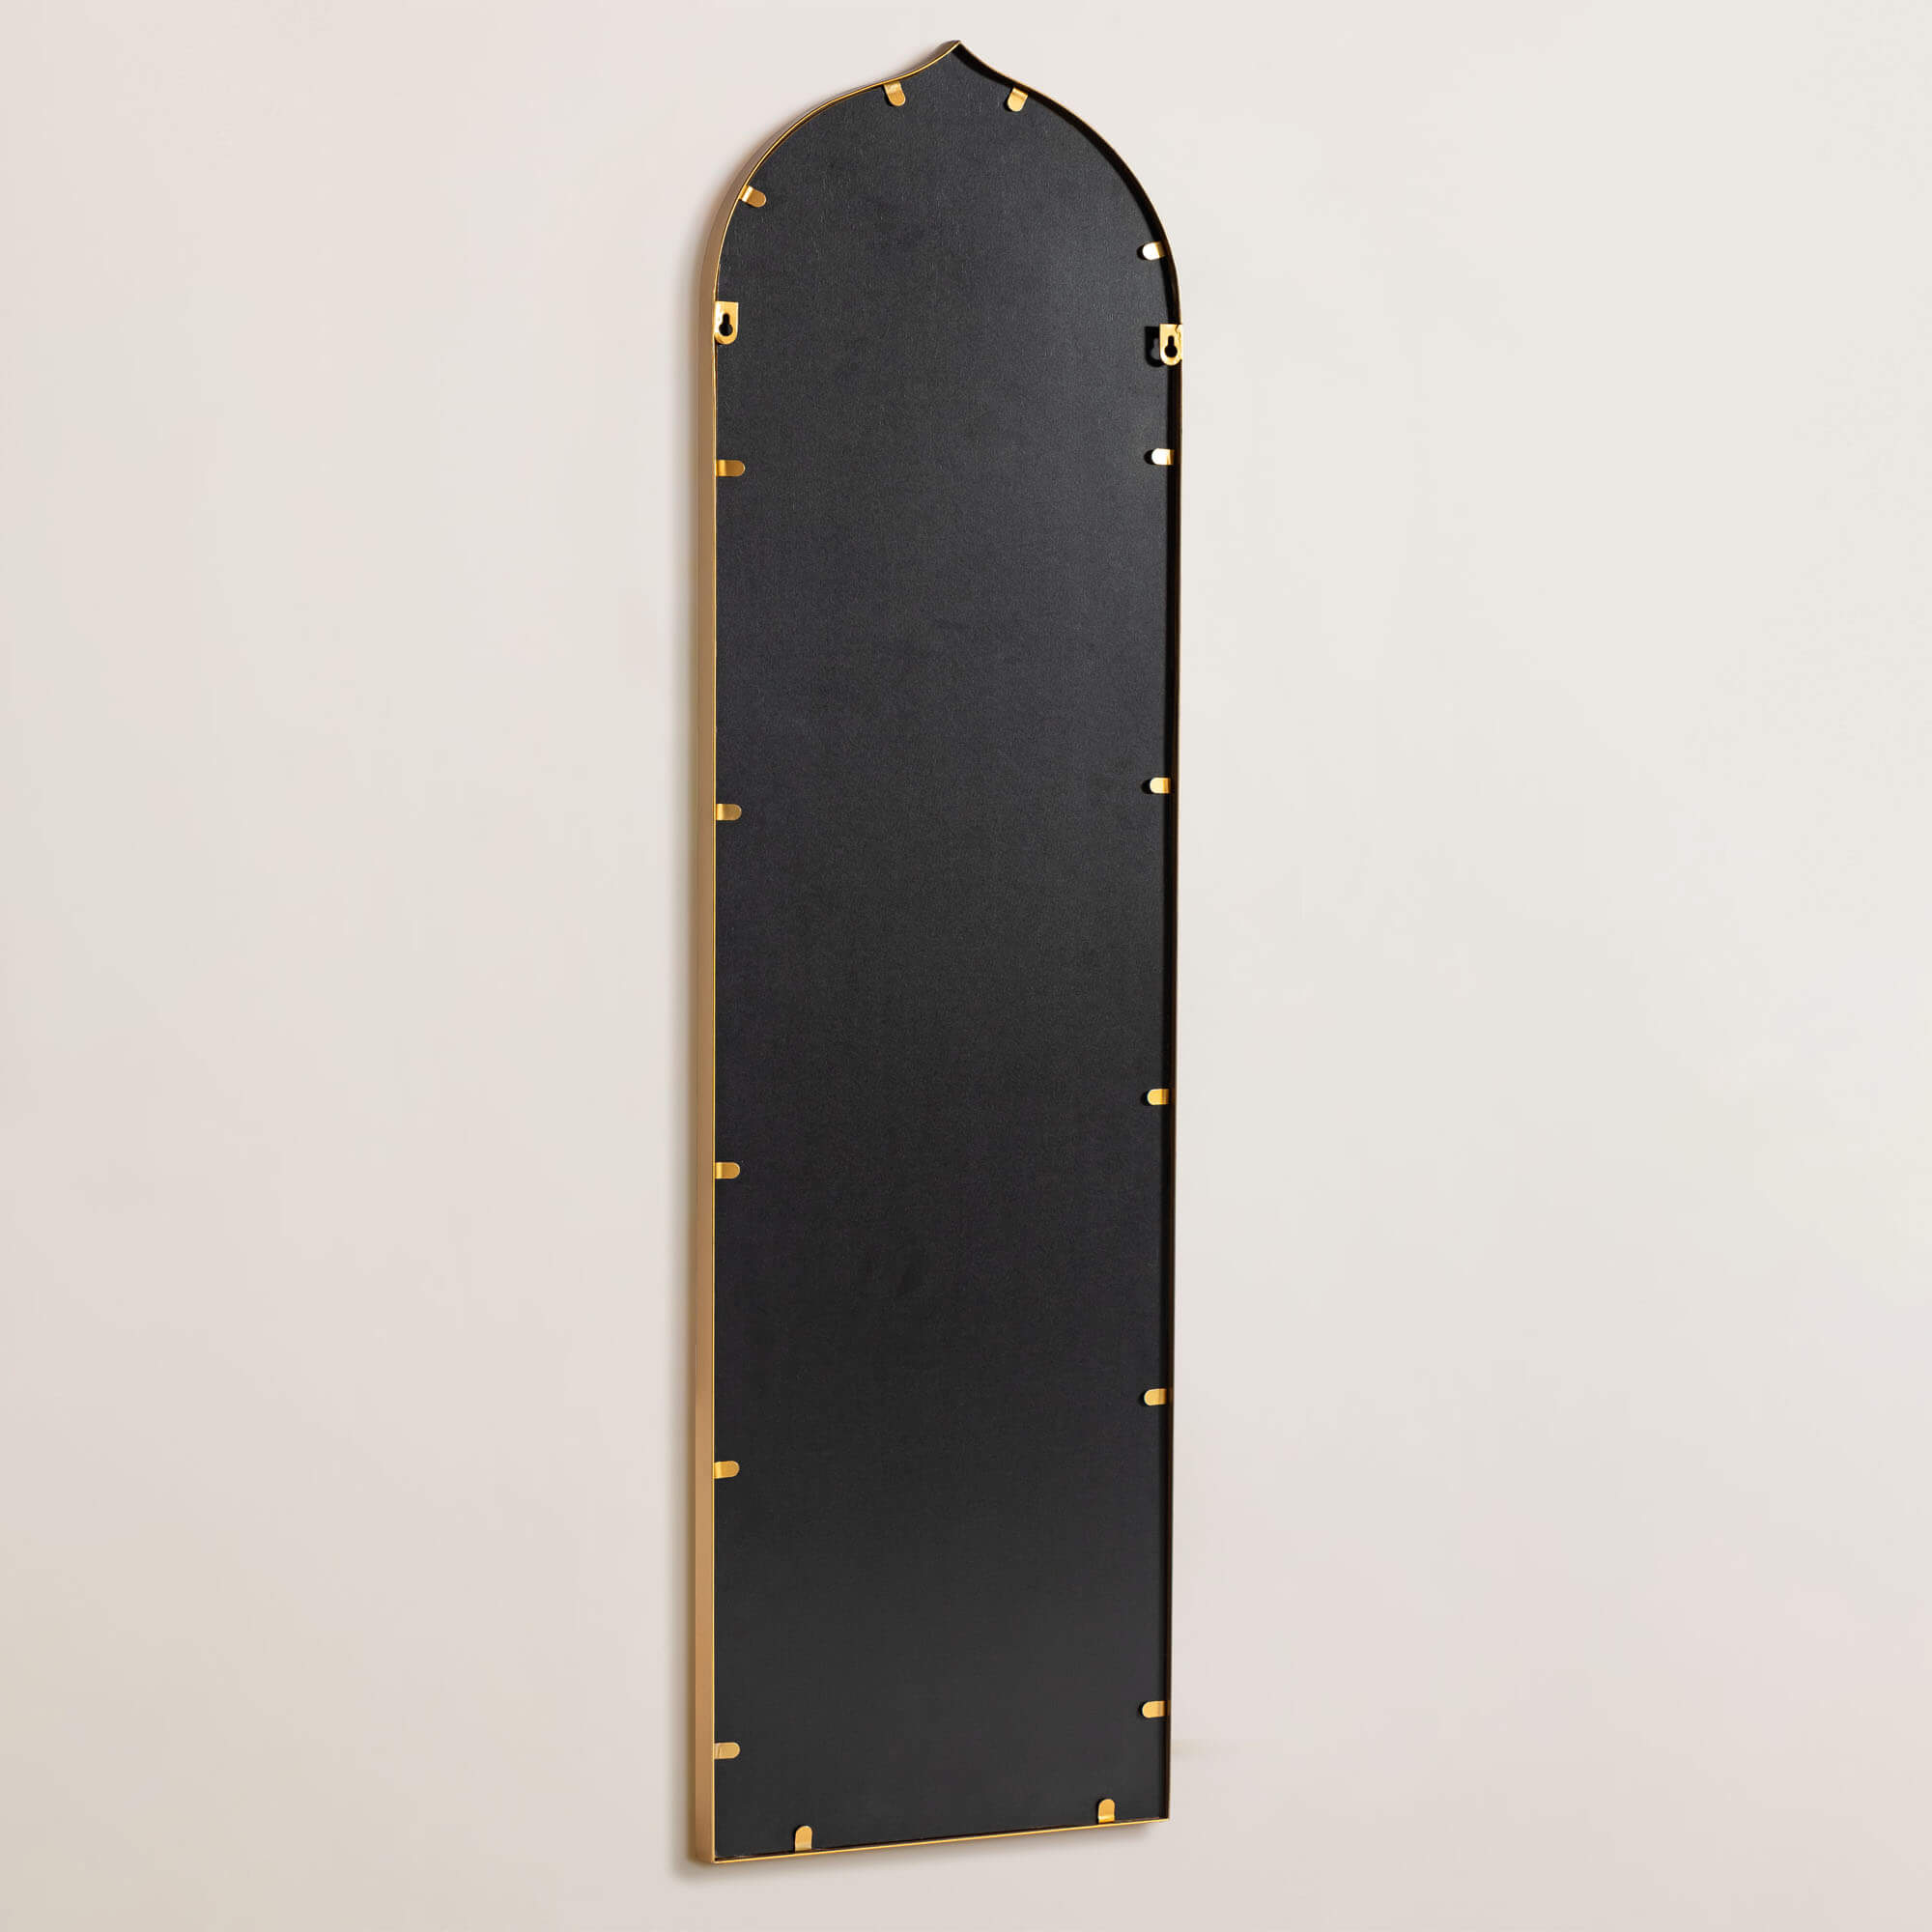 Hilary- Iron Elongated Gold & Black Arched Wall Decor Wall Mirror